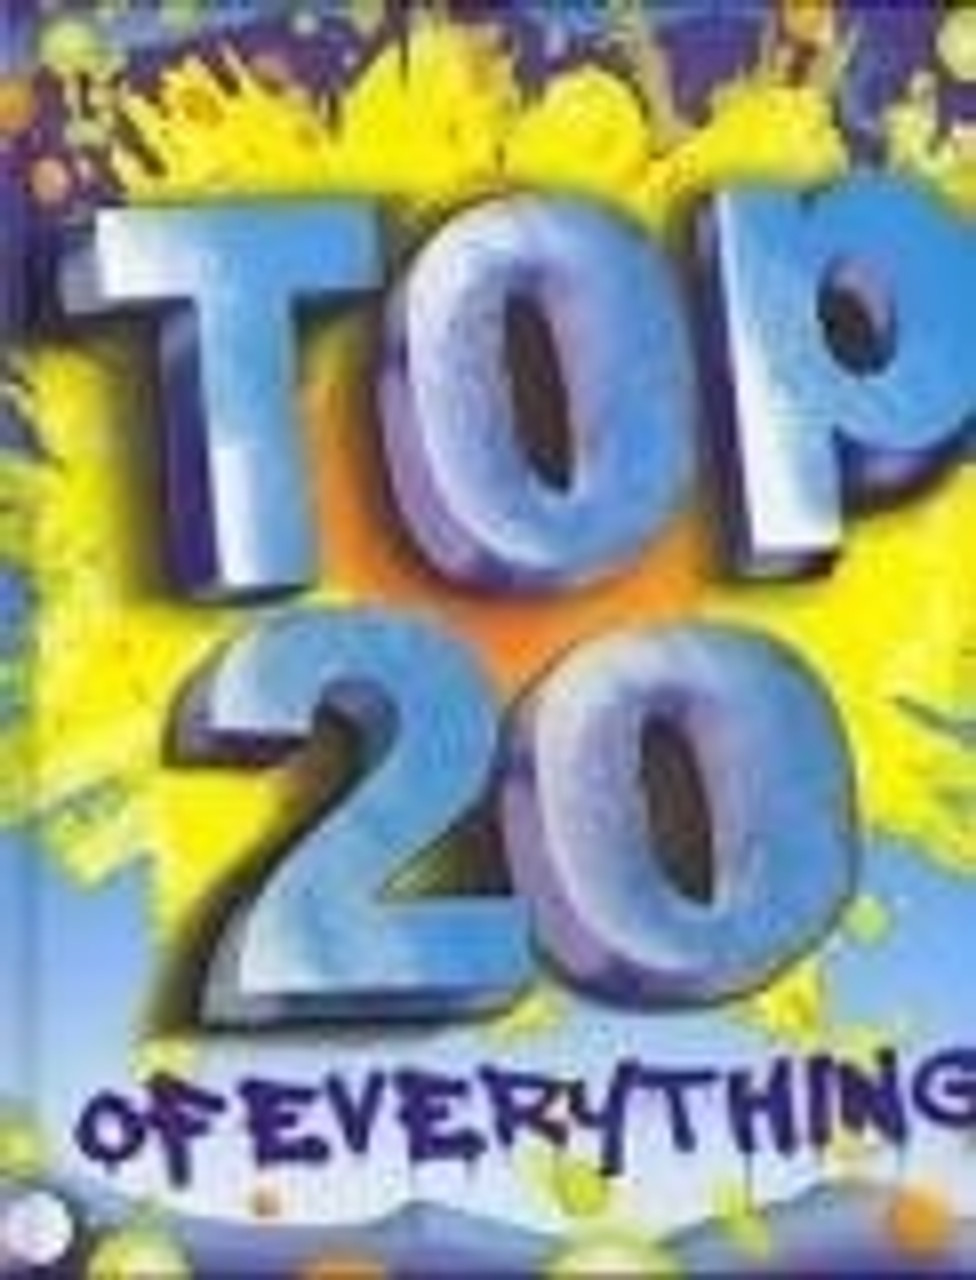 Top 20 Of Everything (Children's Coffee Table book)